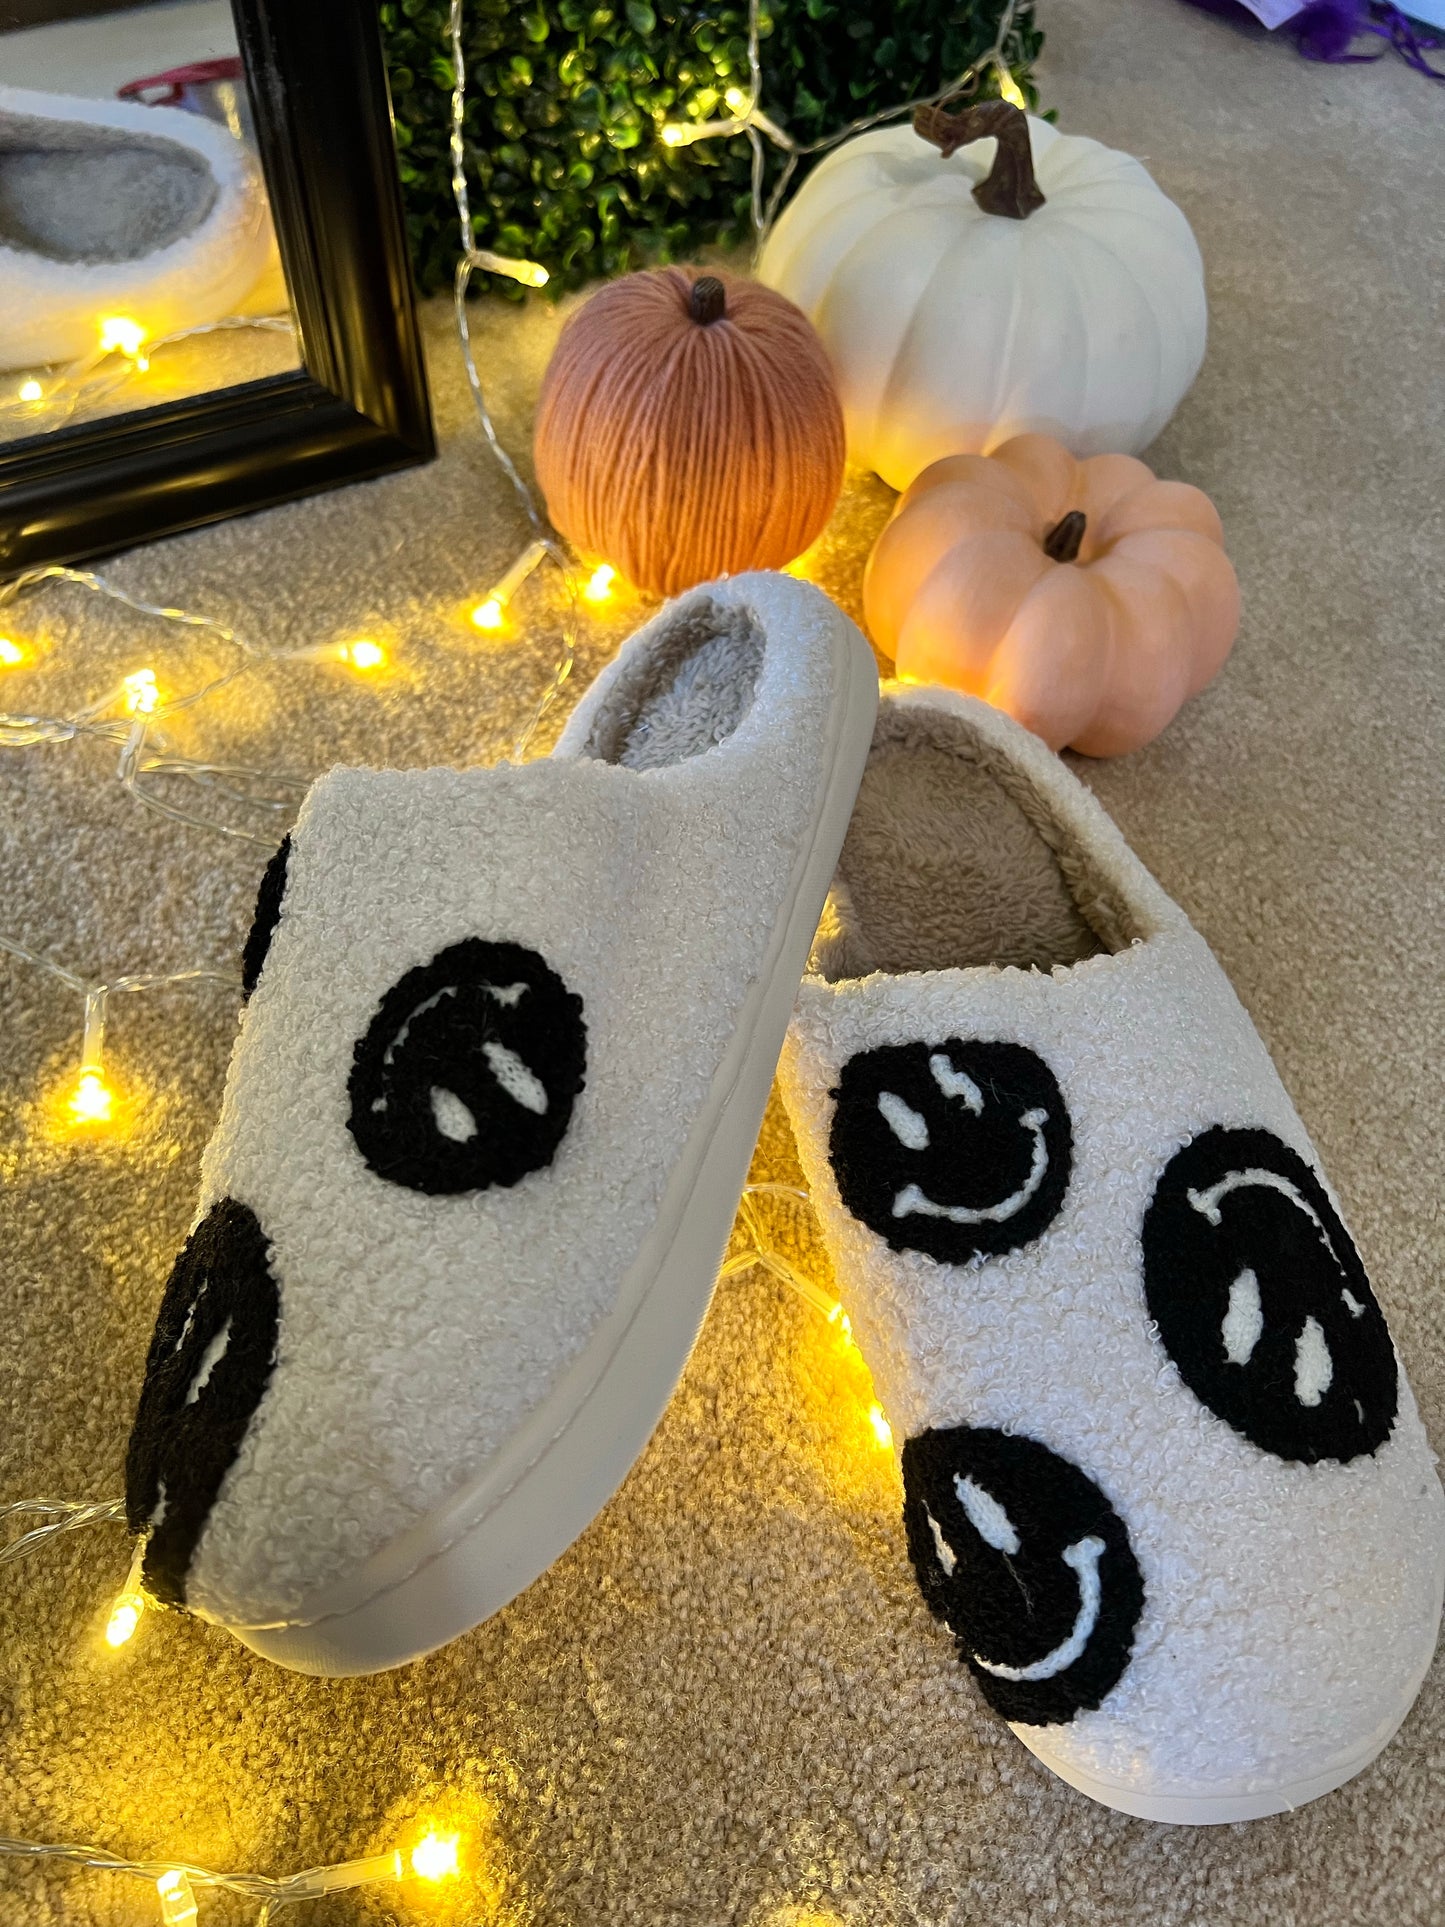 Smiley Face Fuzzy Slippers